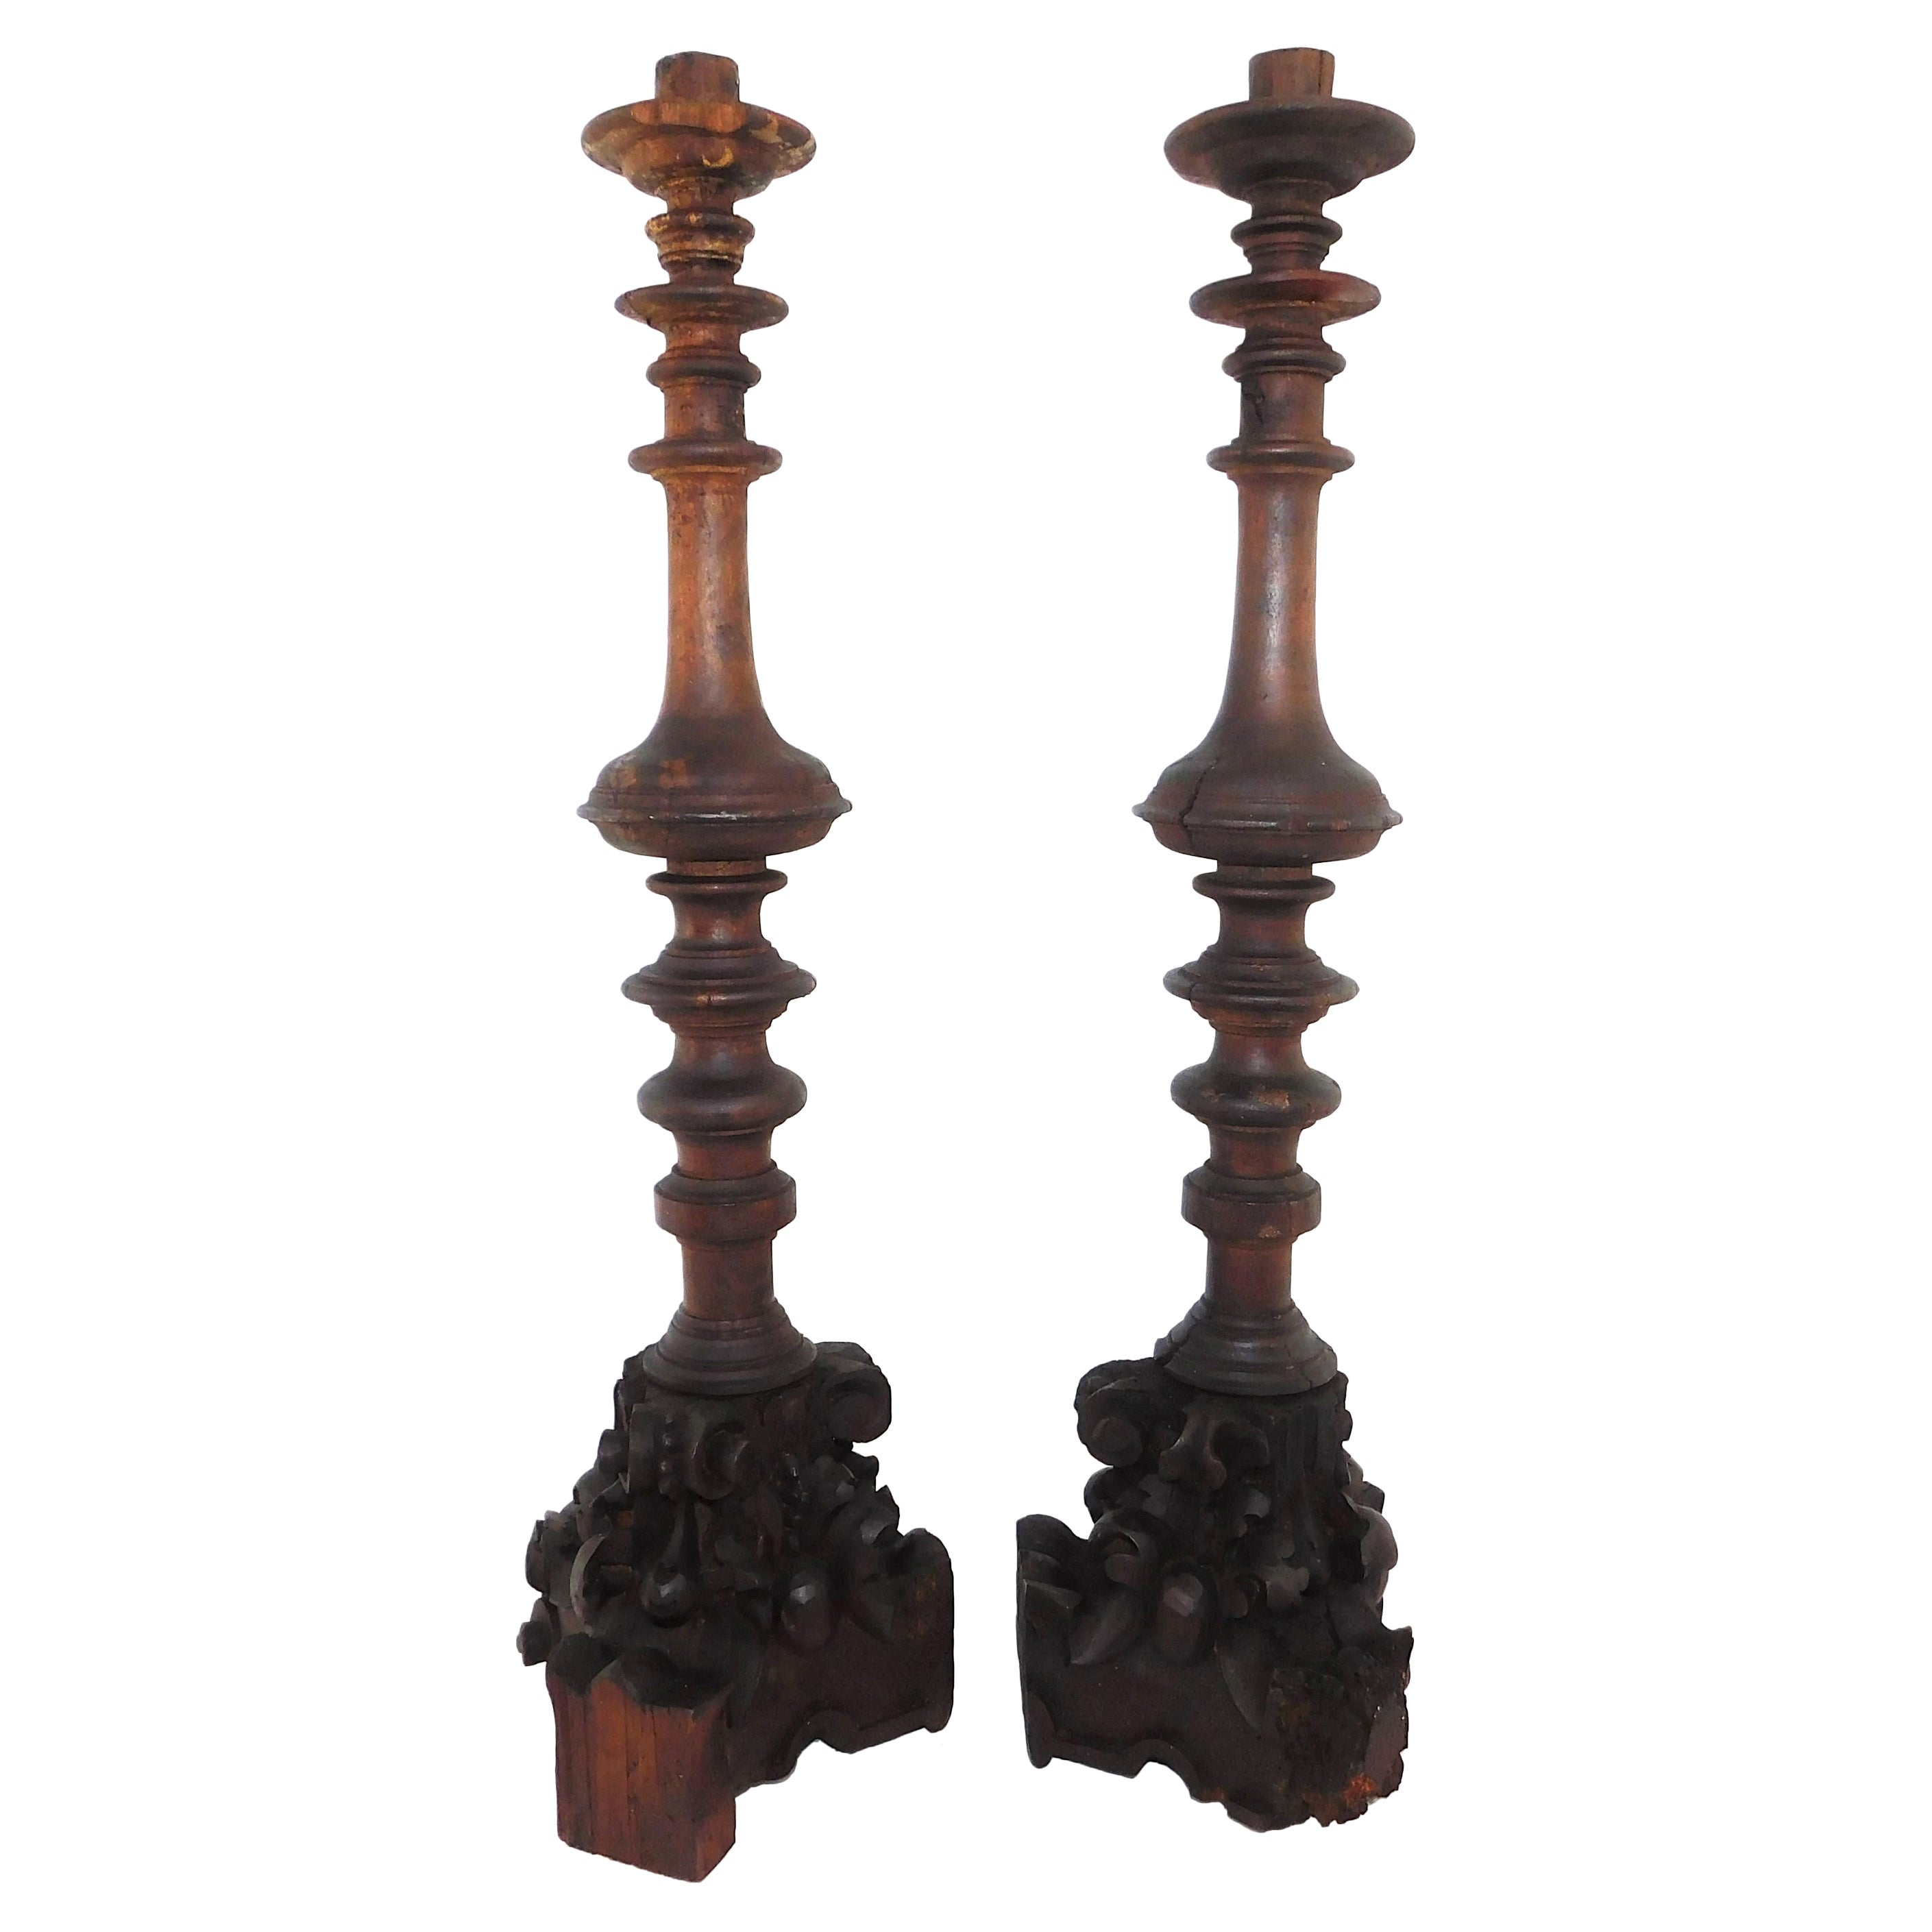 Pair of Tall Mid-19th Century Traditional Rustic Wood Candlesticks For Sale